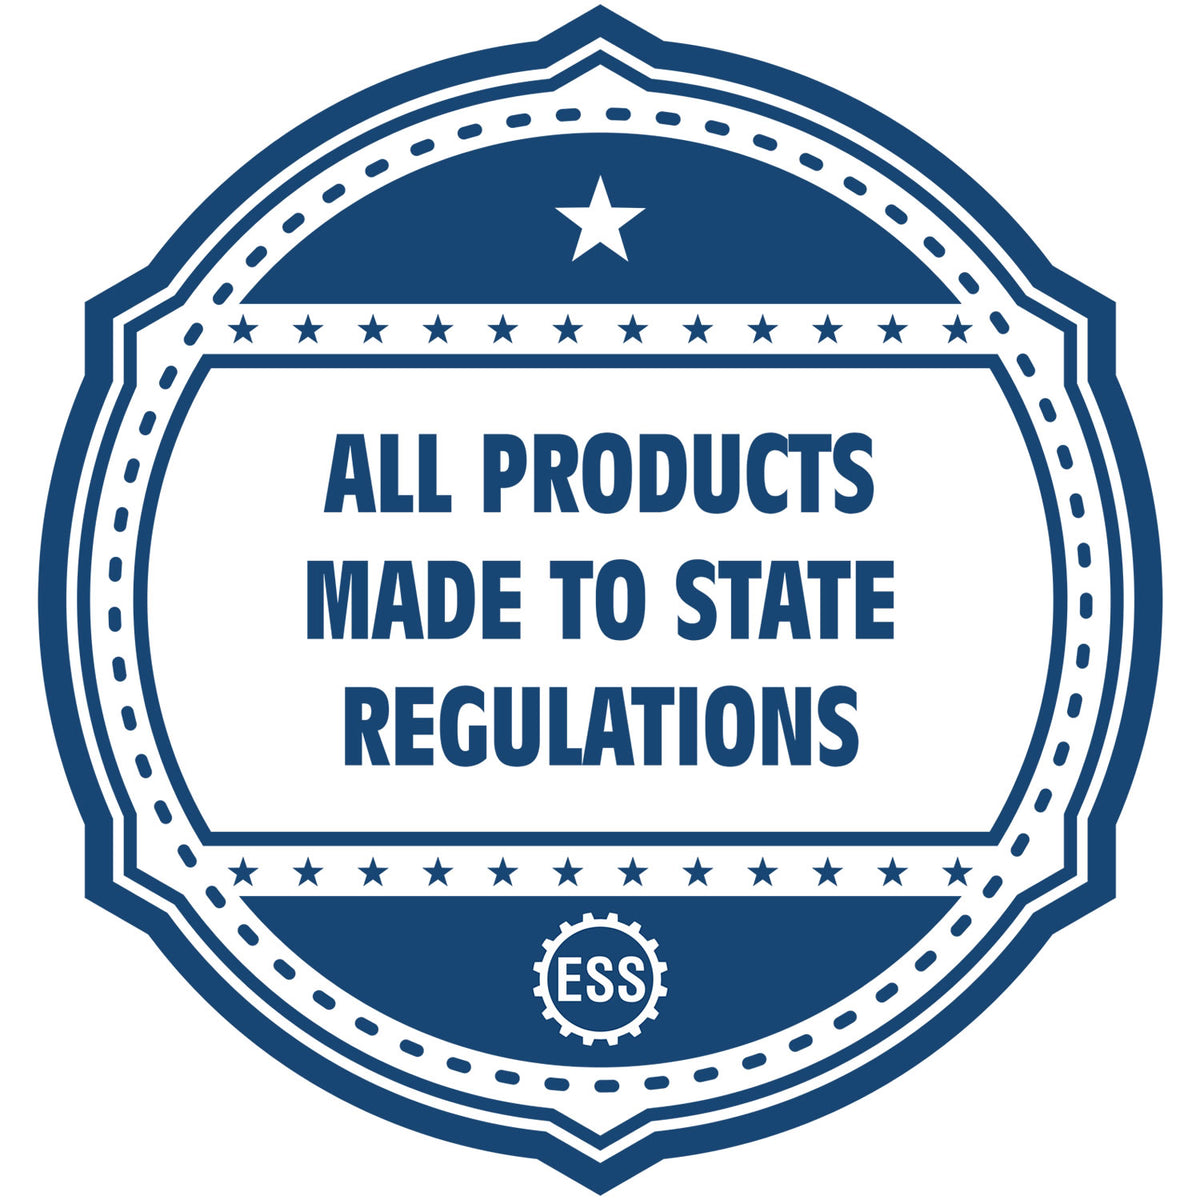 An icon or badge element for the Digital Louisiana Landscape Architect Stamp showing that this product is made in compliance with state regulations.